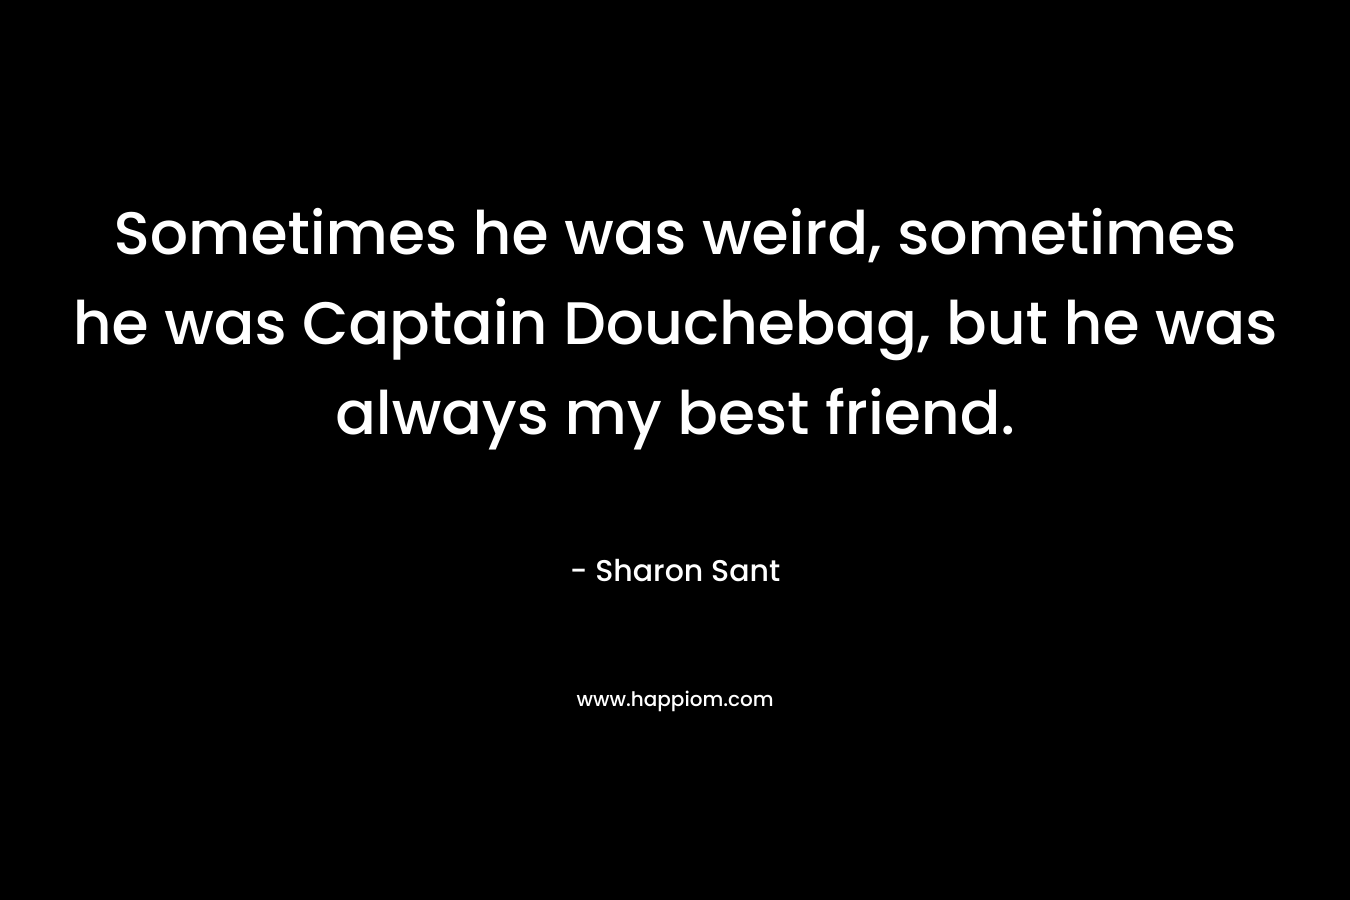 Sometimes he was weird, sometimes he was Captain Douchebag, but he was always my best friend. – Sharon Sant